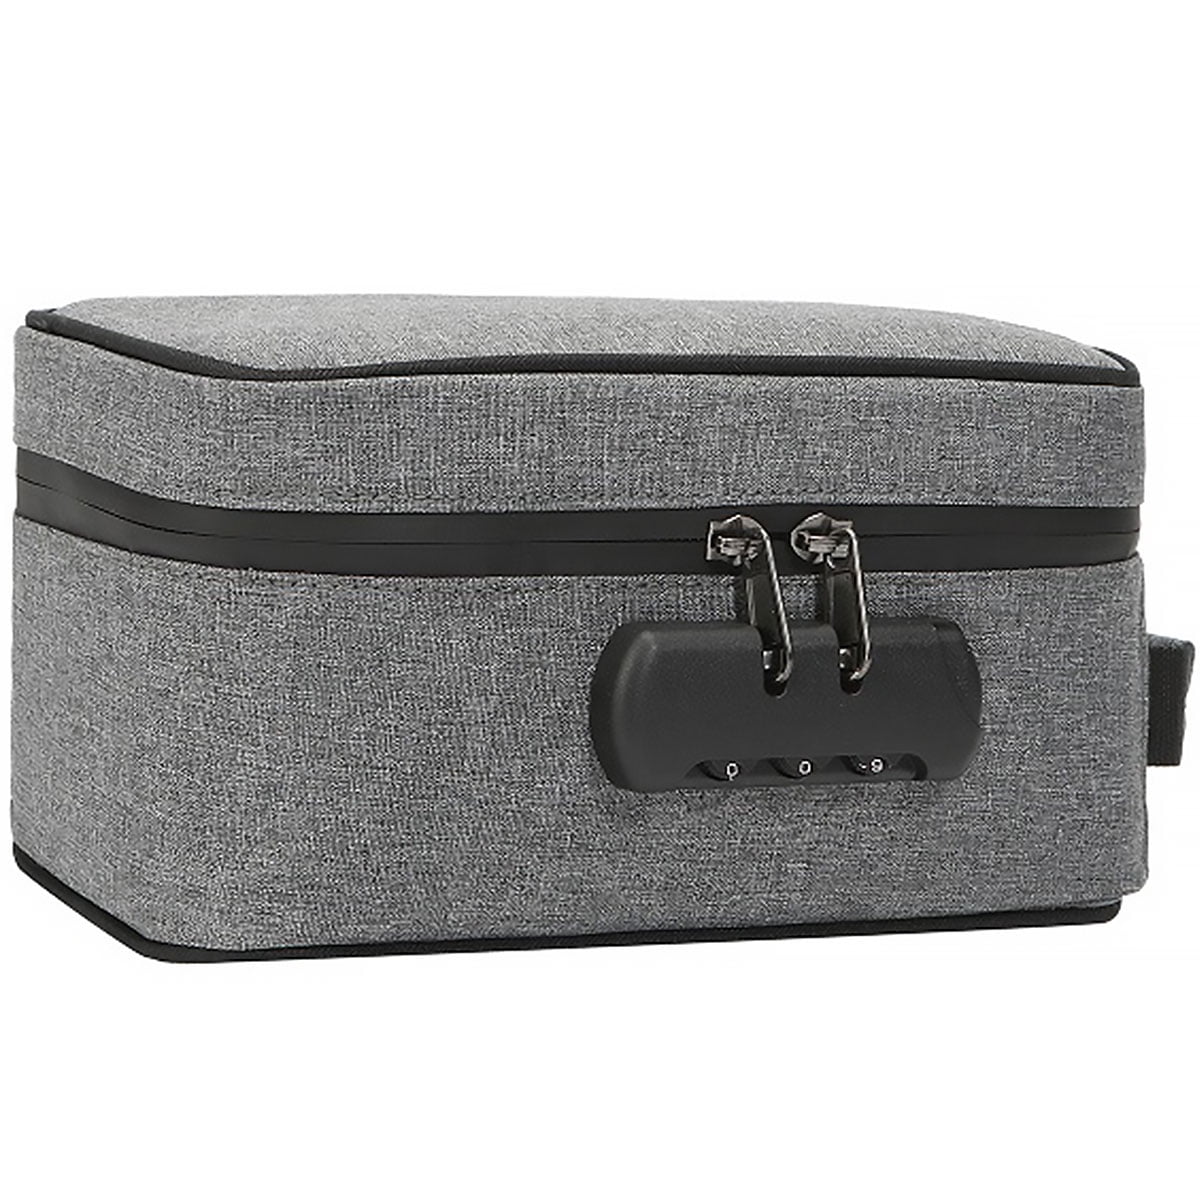 Great Buy ECO Farm Odorless Storage Bag Smell Proof Case With Lock Design